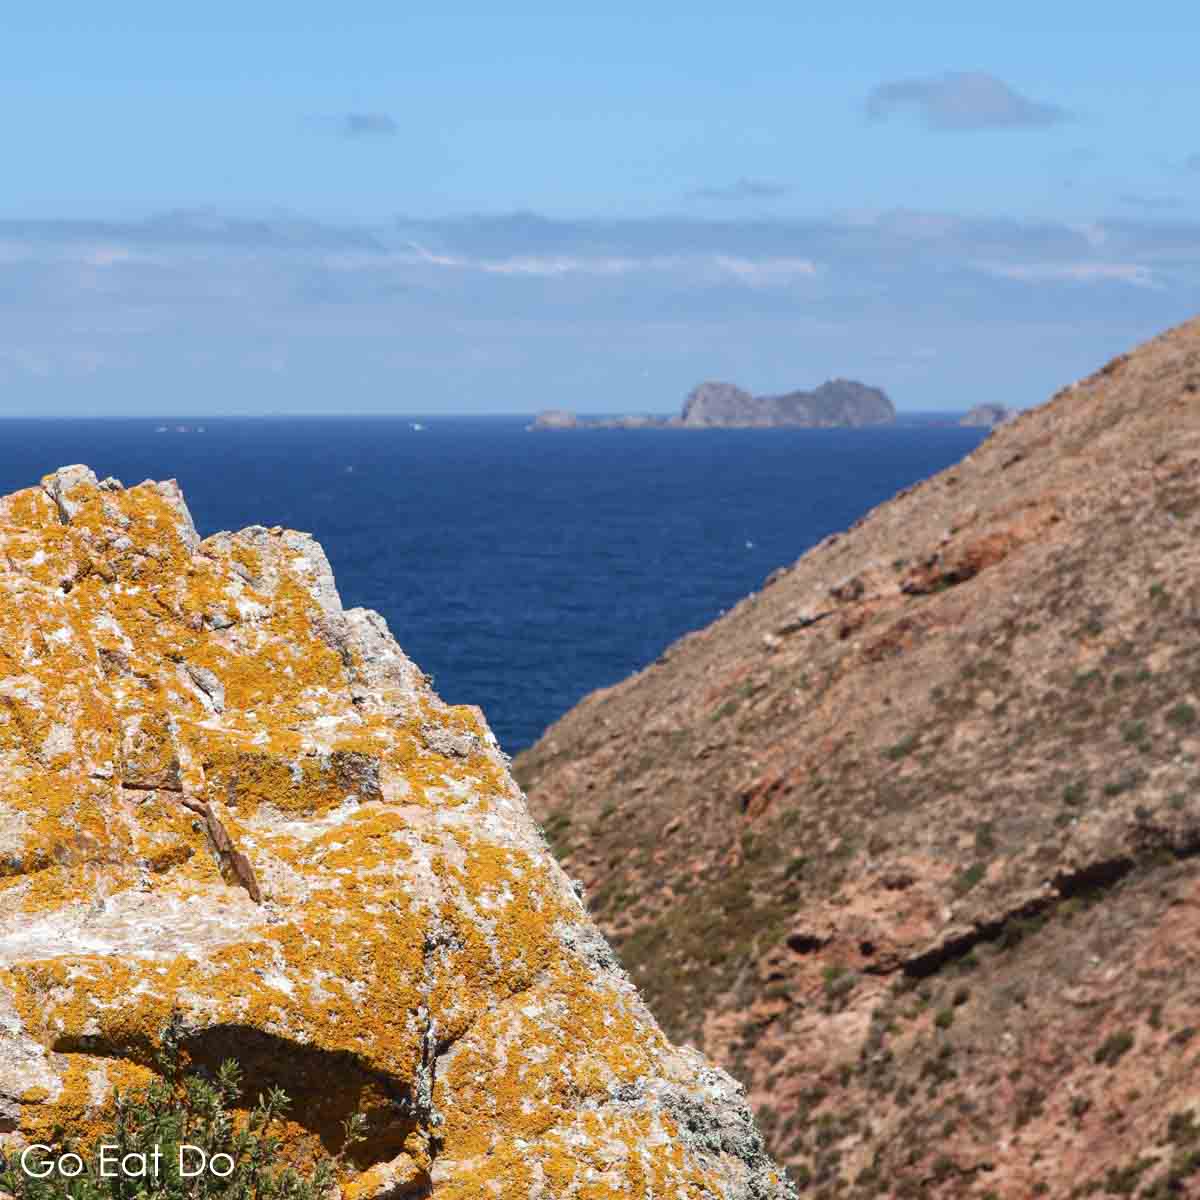 Lichen covered rocks on the Berlengas Islands in the Atlantic Ocean.